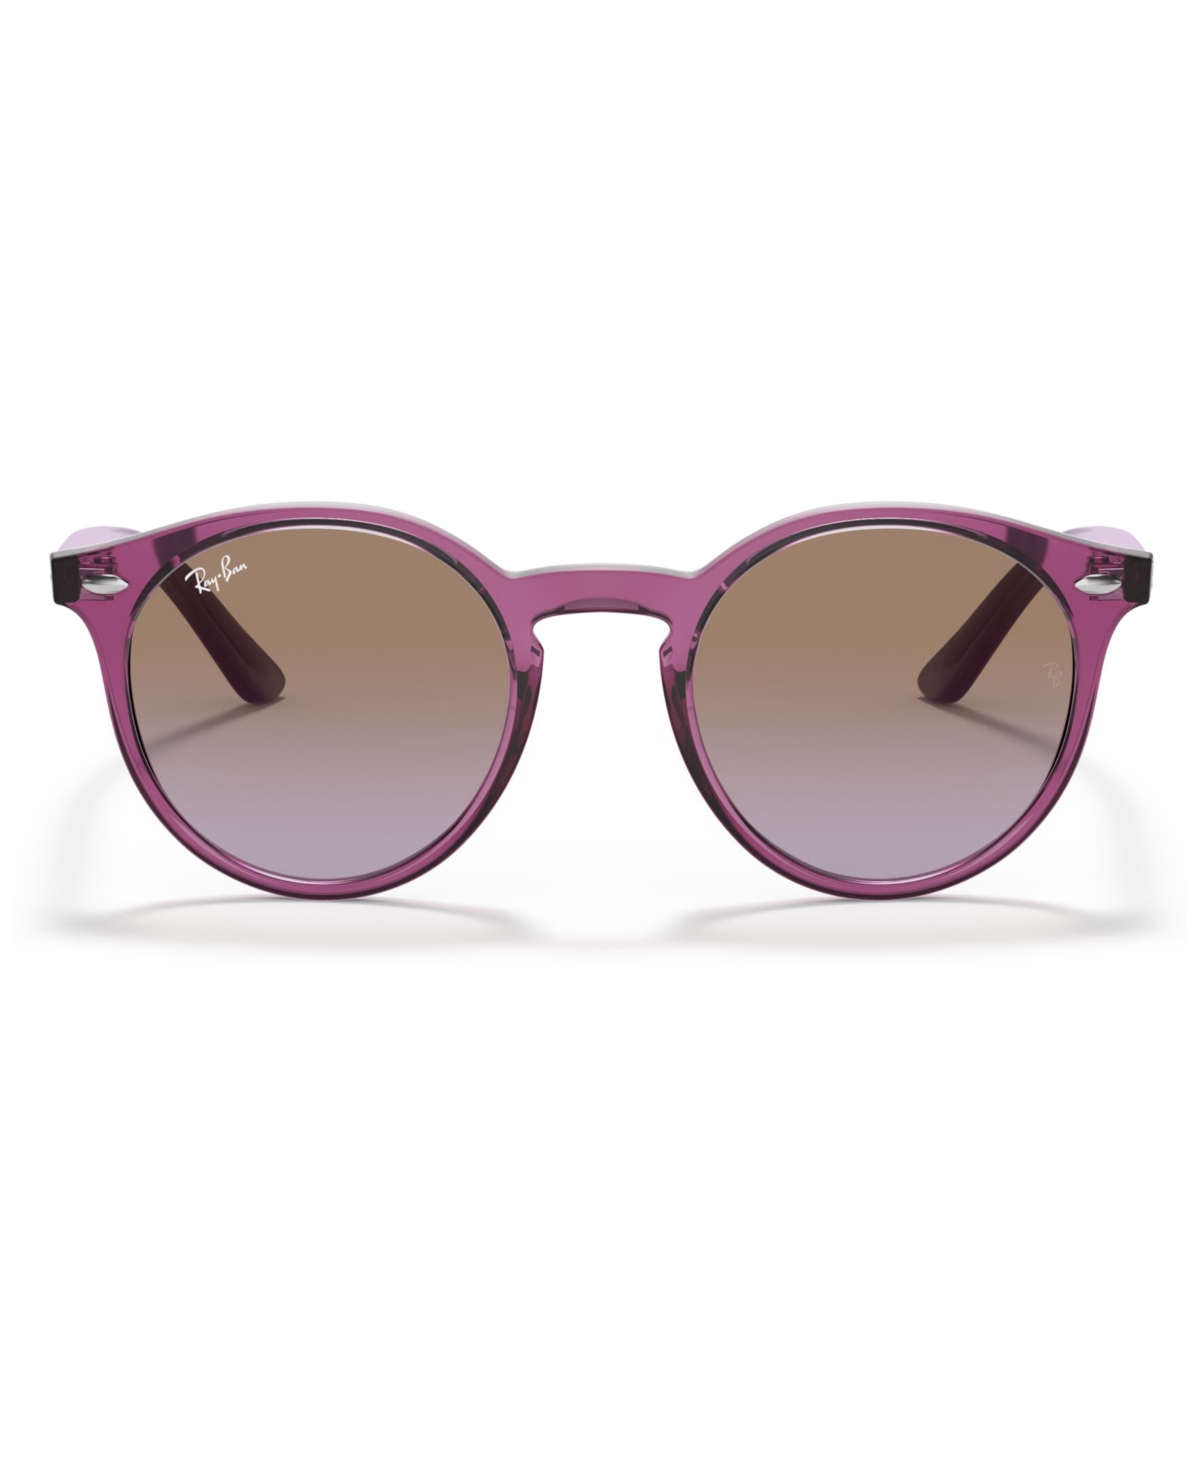 Ray-ban Jr . Kids Sunglasses, Rj9064 (ages 7-10) In Transparent Fuxia,violet Gradient Brown